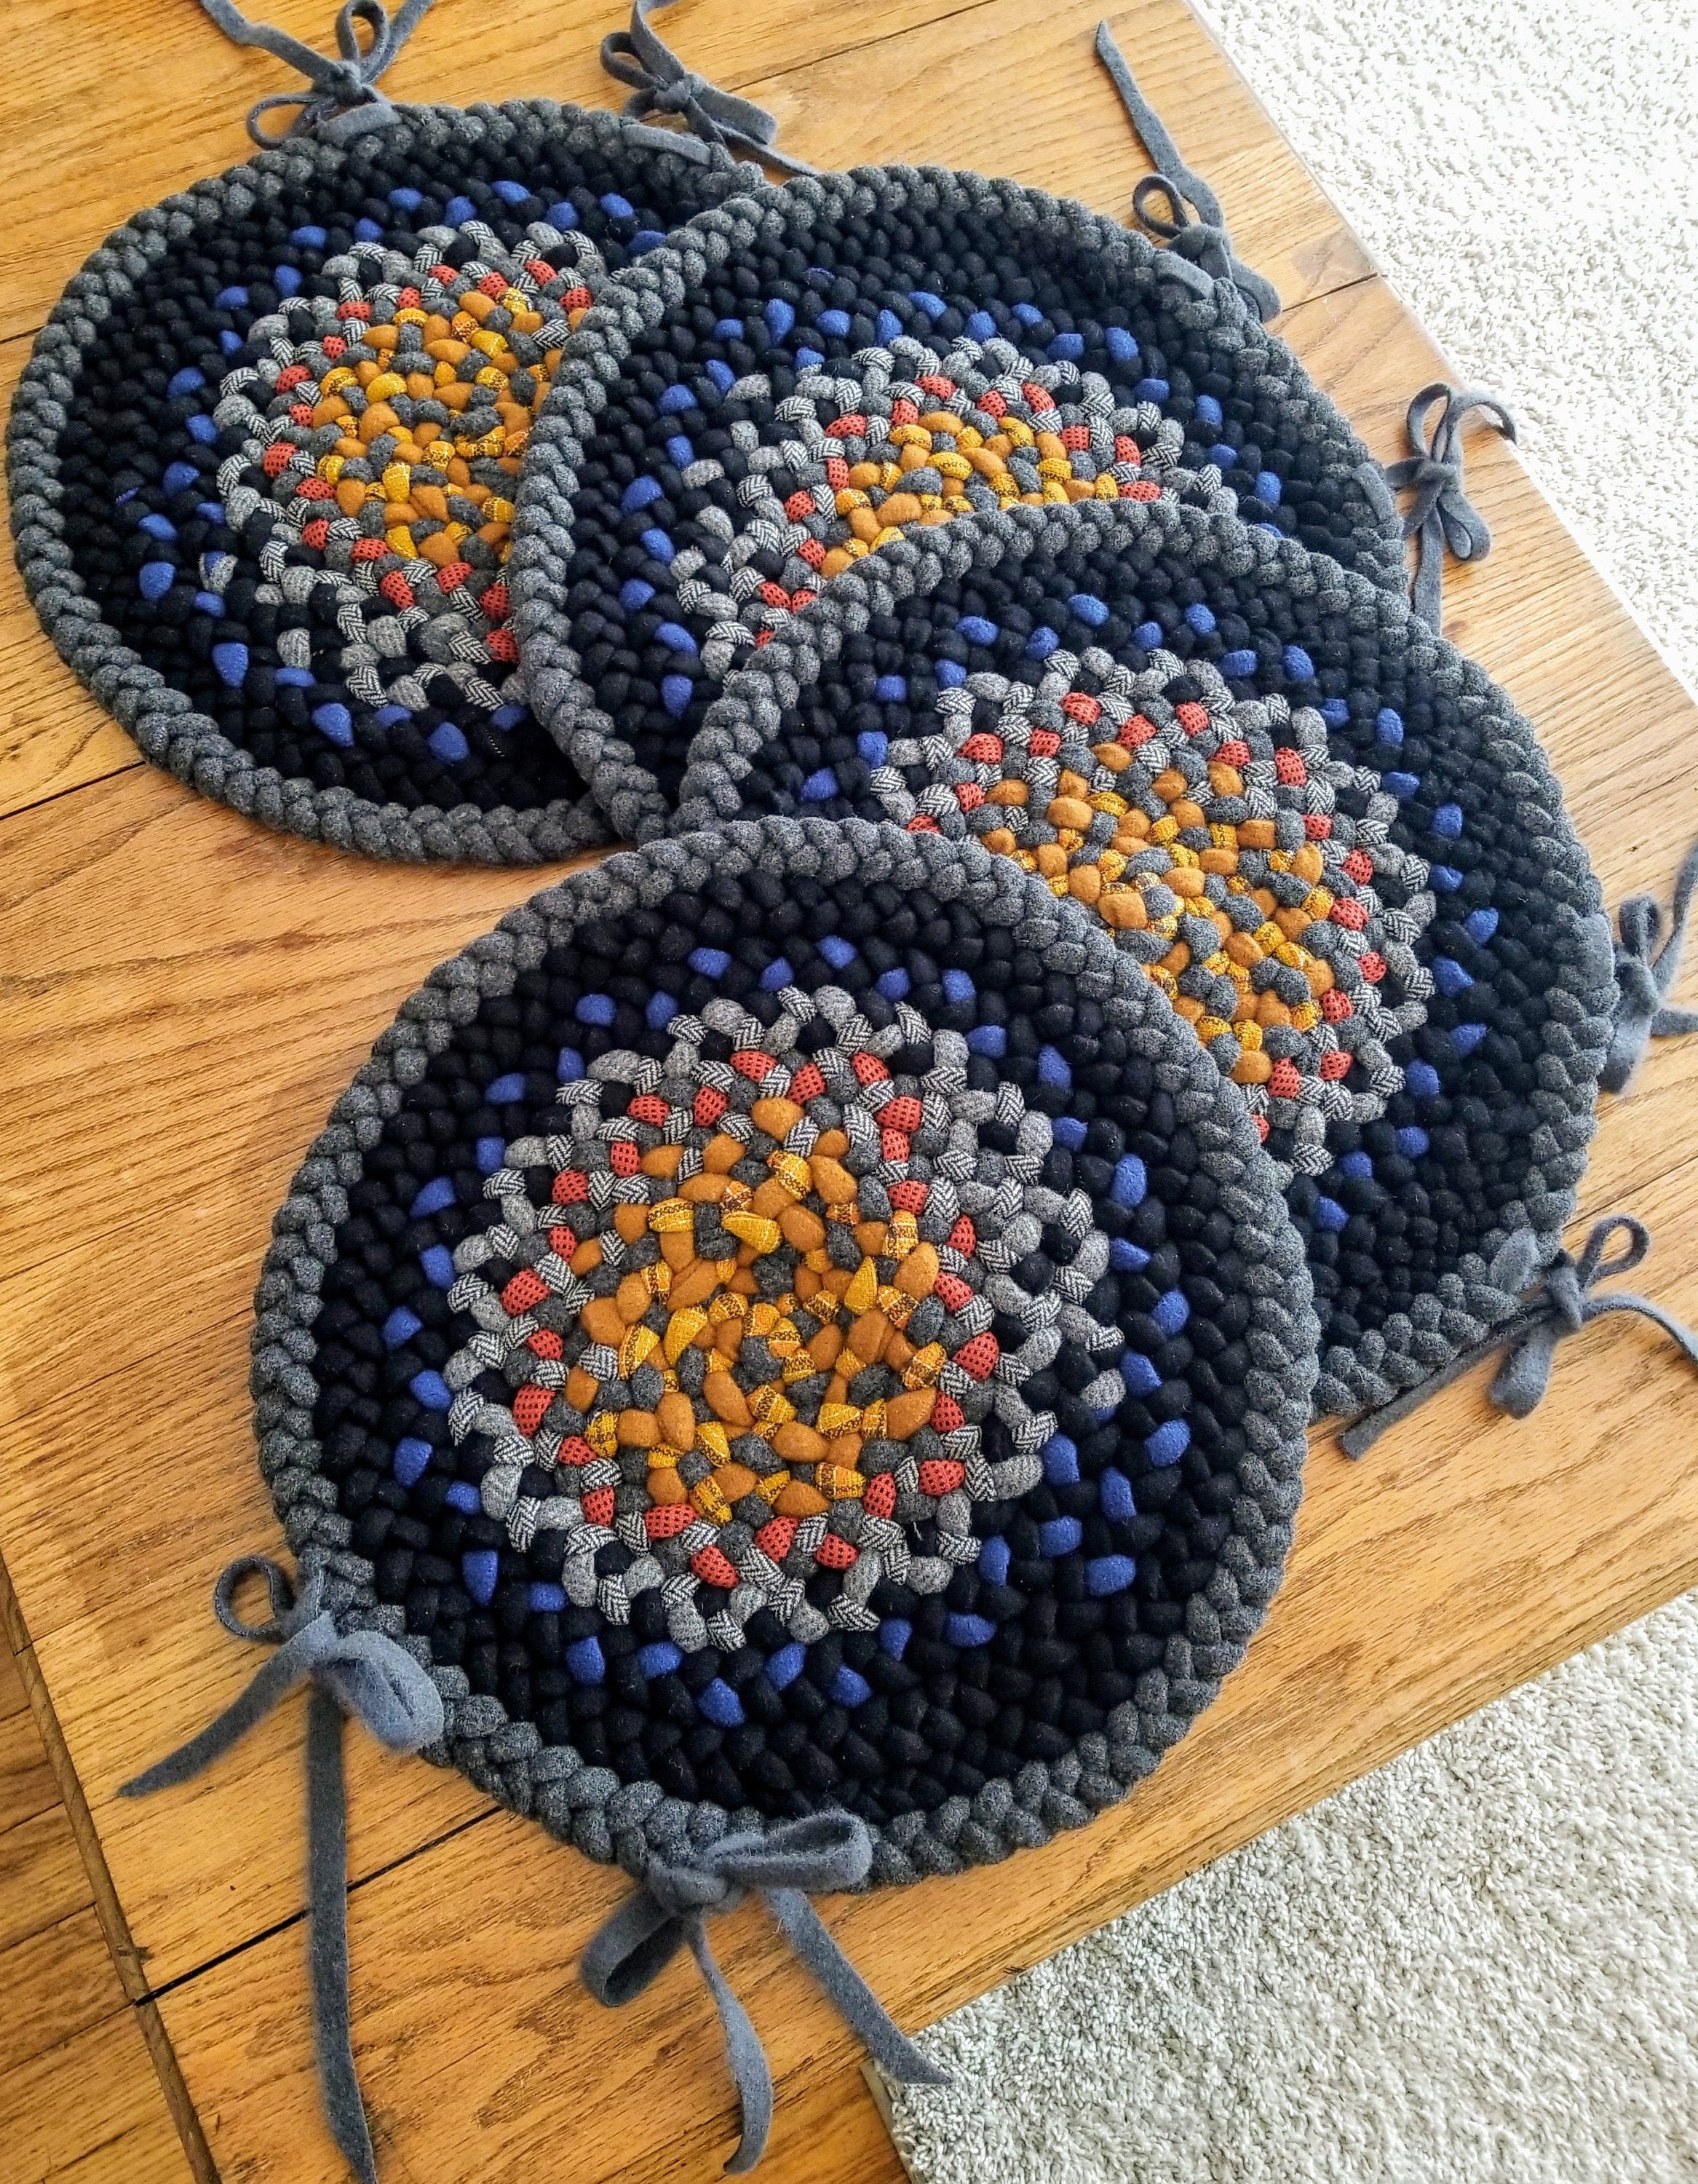 How to make braided chair pads